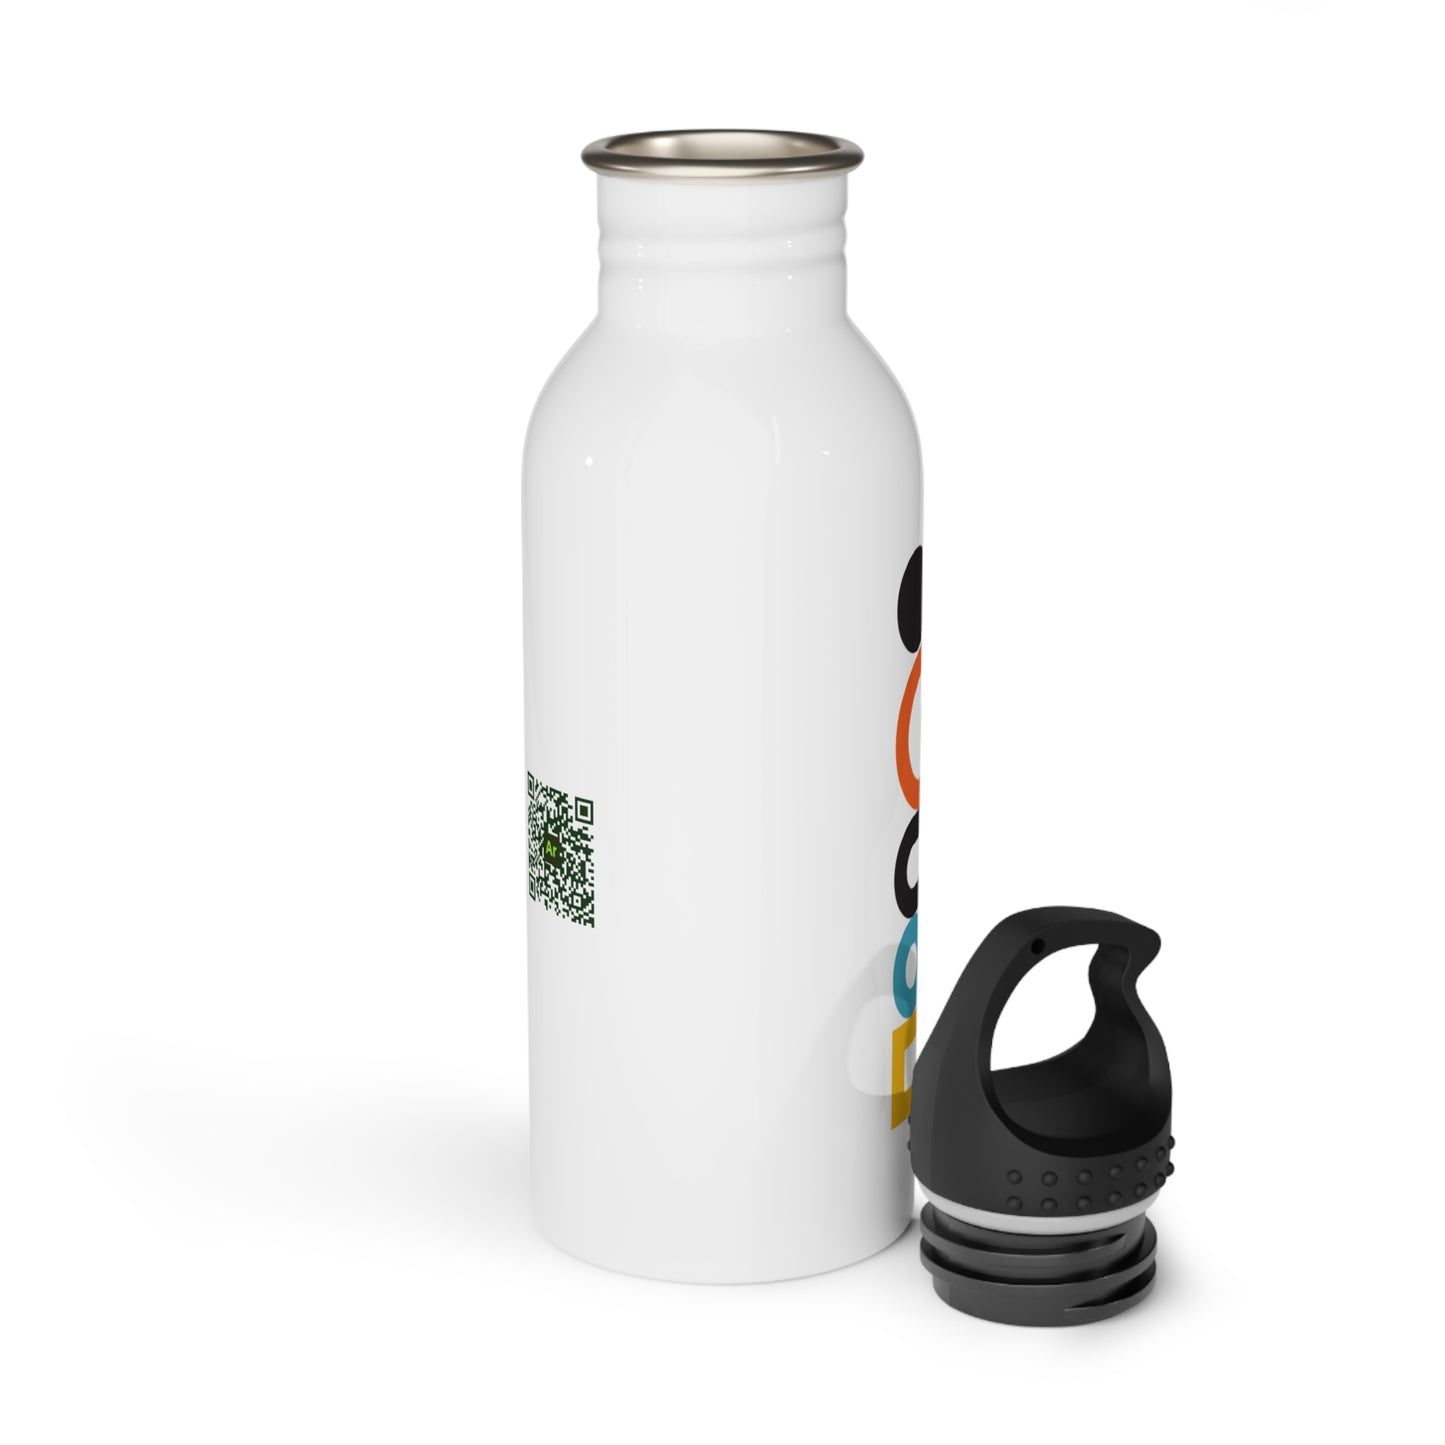 Comical Shapes - Stainless Steel Water Bottle